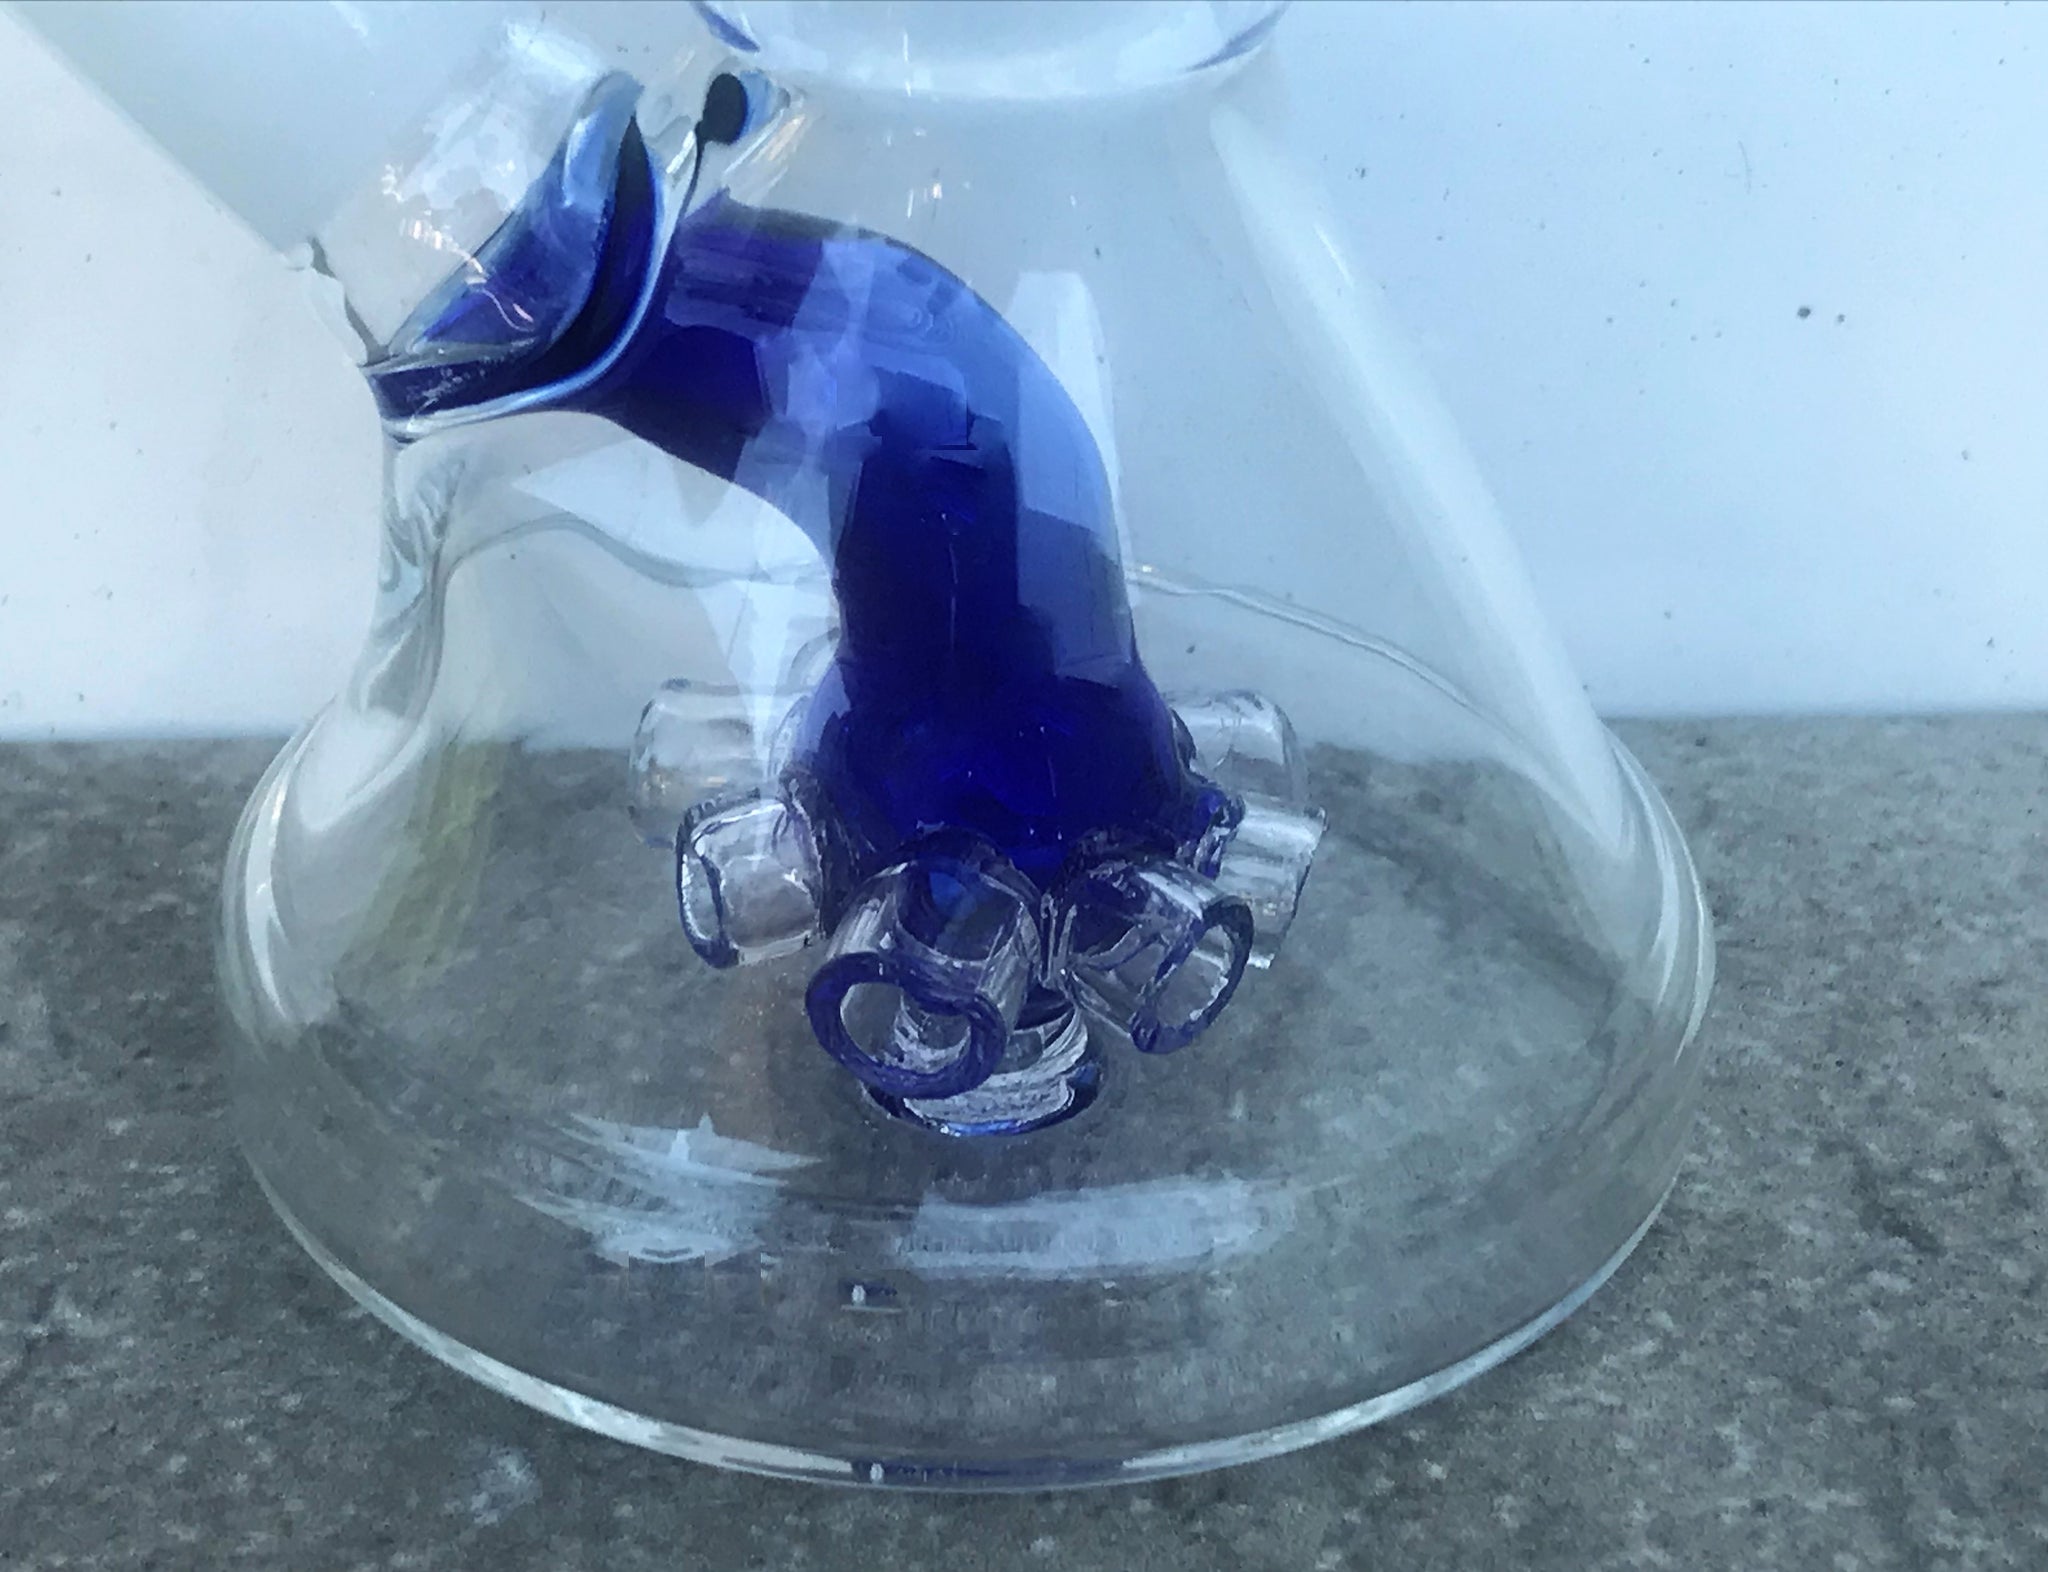 Dropshipping Hookah Beaker Bong Unique Glass Oil Burner Pipe With 14mm Bowl  Piece For Smoking And Shisha From Loveglass, $14.39